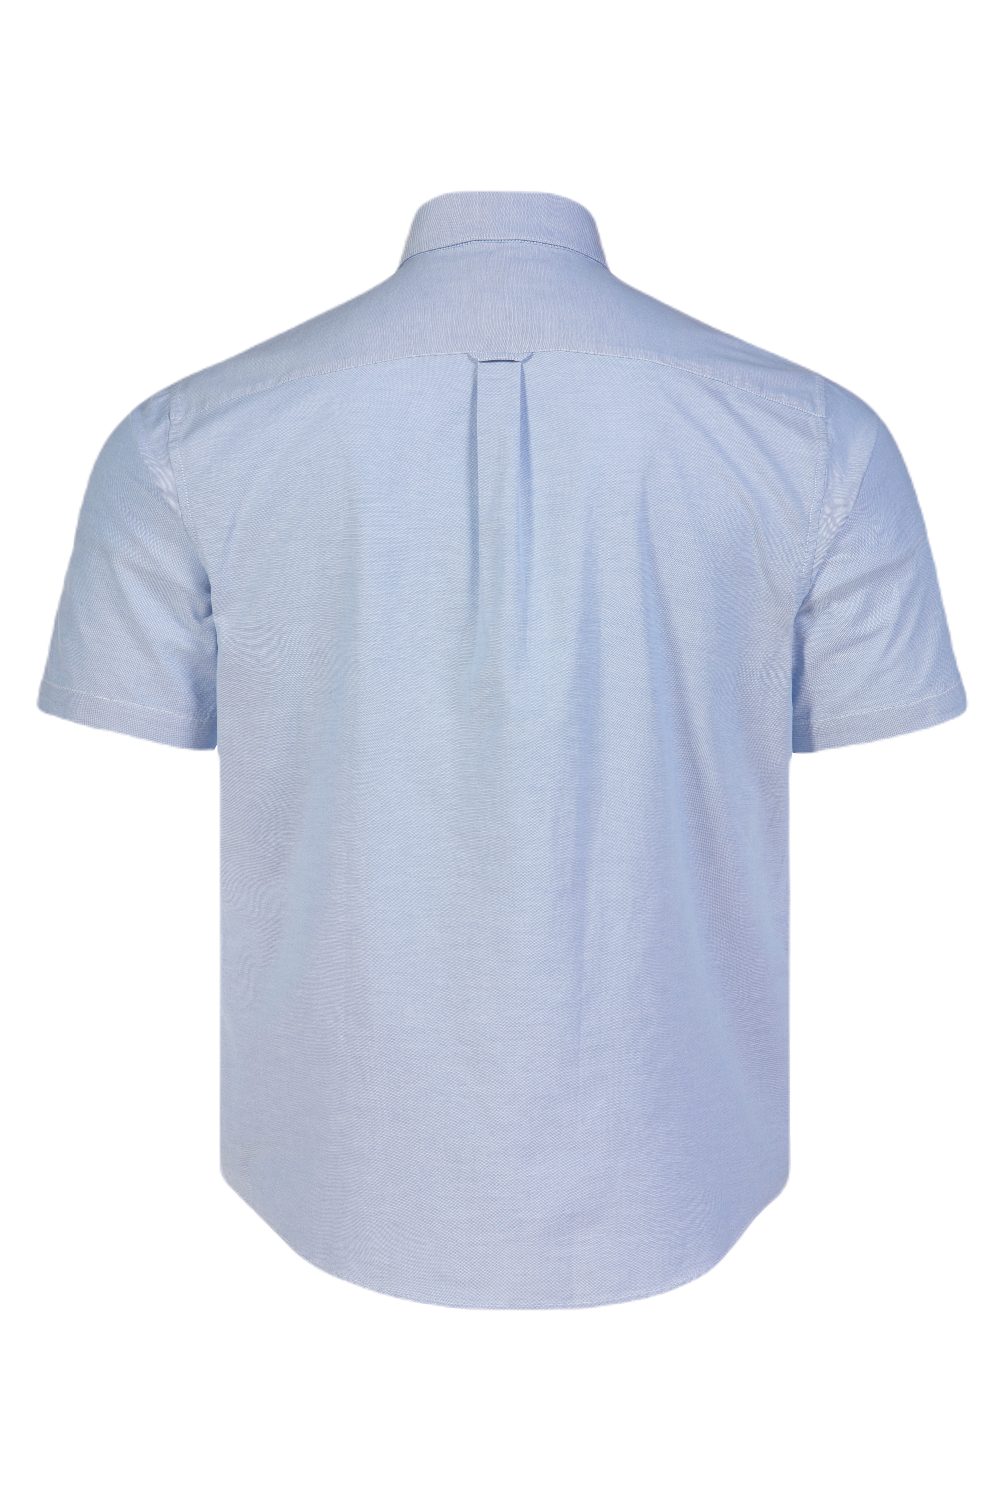 Musto Men Essential Short Sleeve Oxford Shirt in Pale Blue